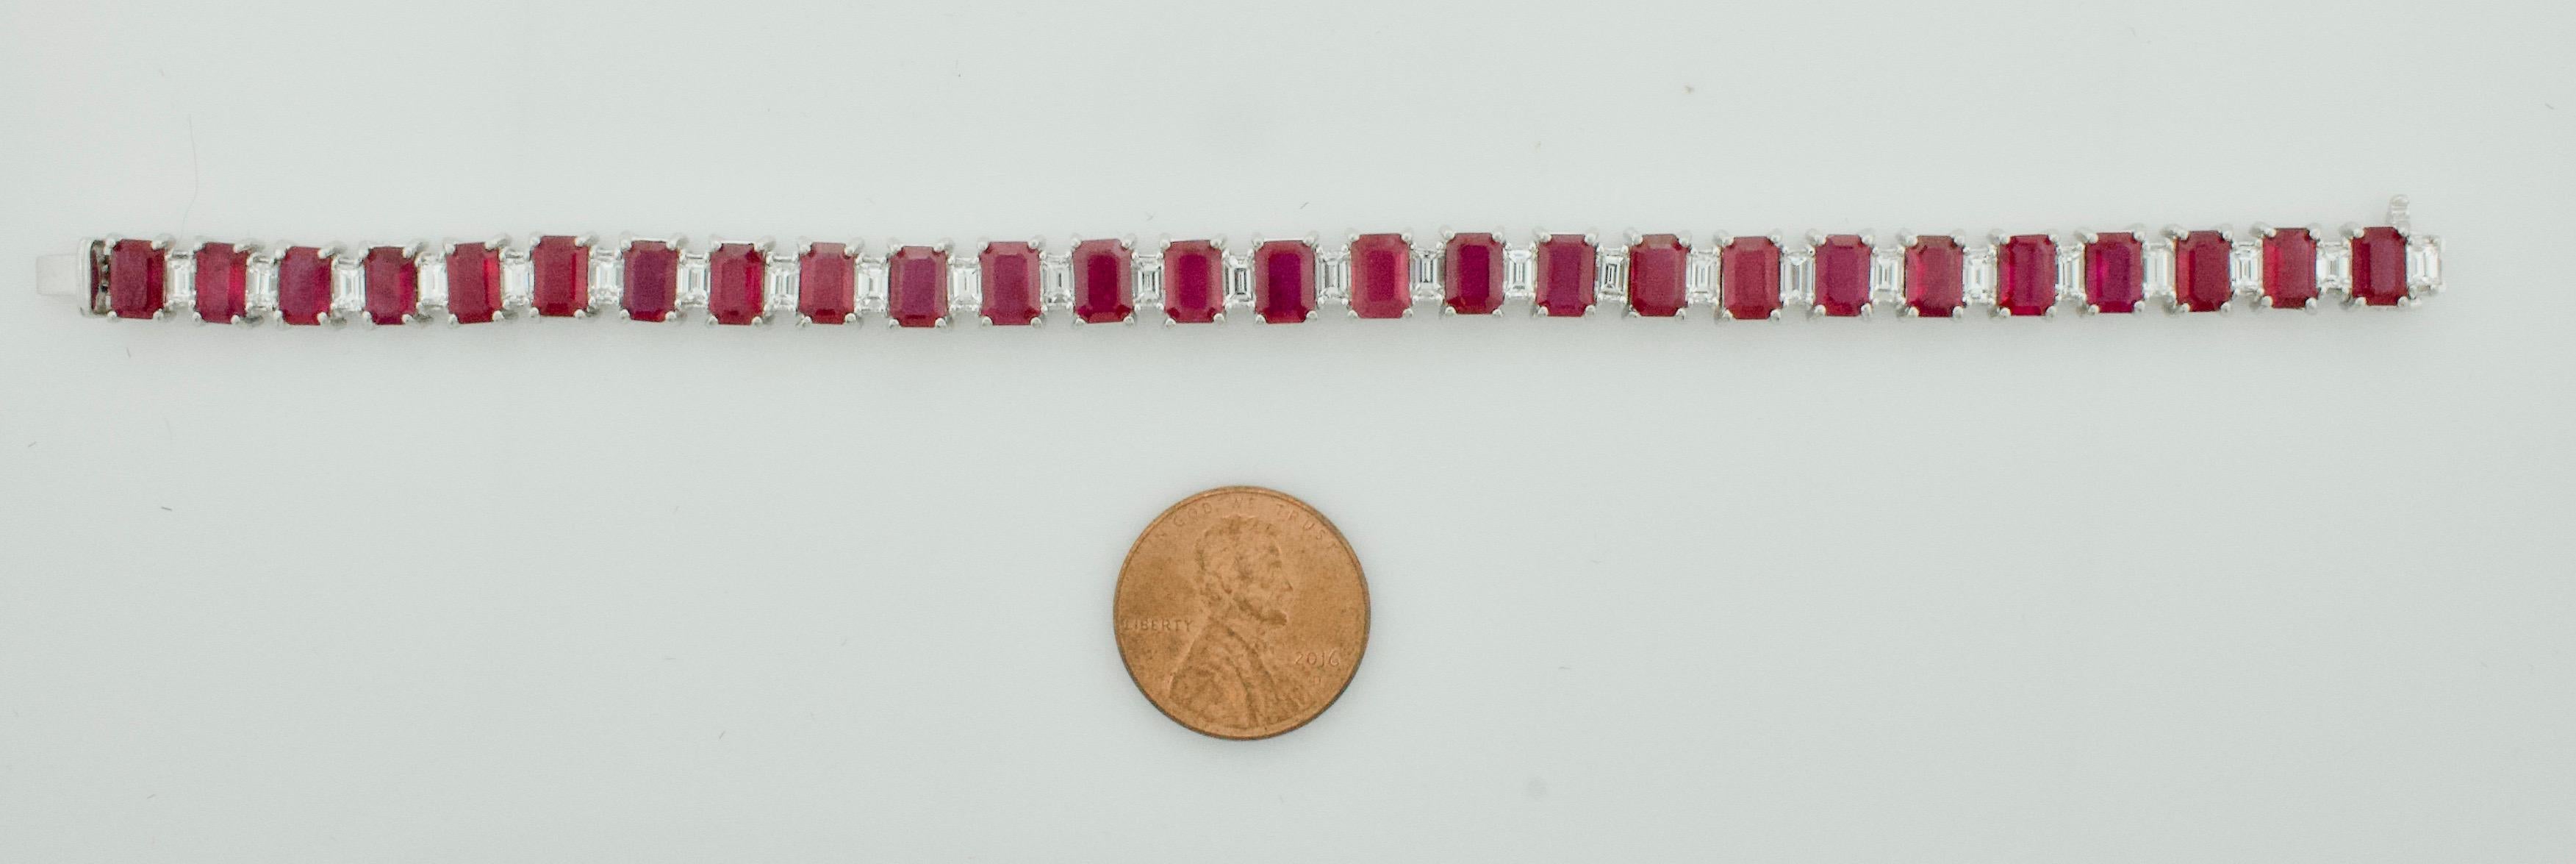 Ruby and Diamond Straight Line (Tennis) Bracelet in Platinum 
Twenty Six Emerald Cut Rubies weighing 15.20 carats [bright with no imperfections visible to the naked eye]
Twenty Seven Baguette Cut Diamonds weighing 2.76 carats [GHI VVS-VS2]

7 Inches